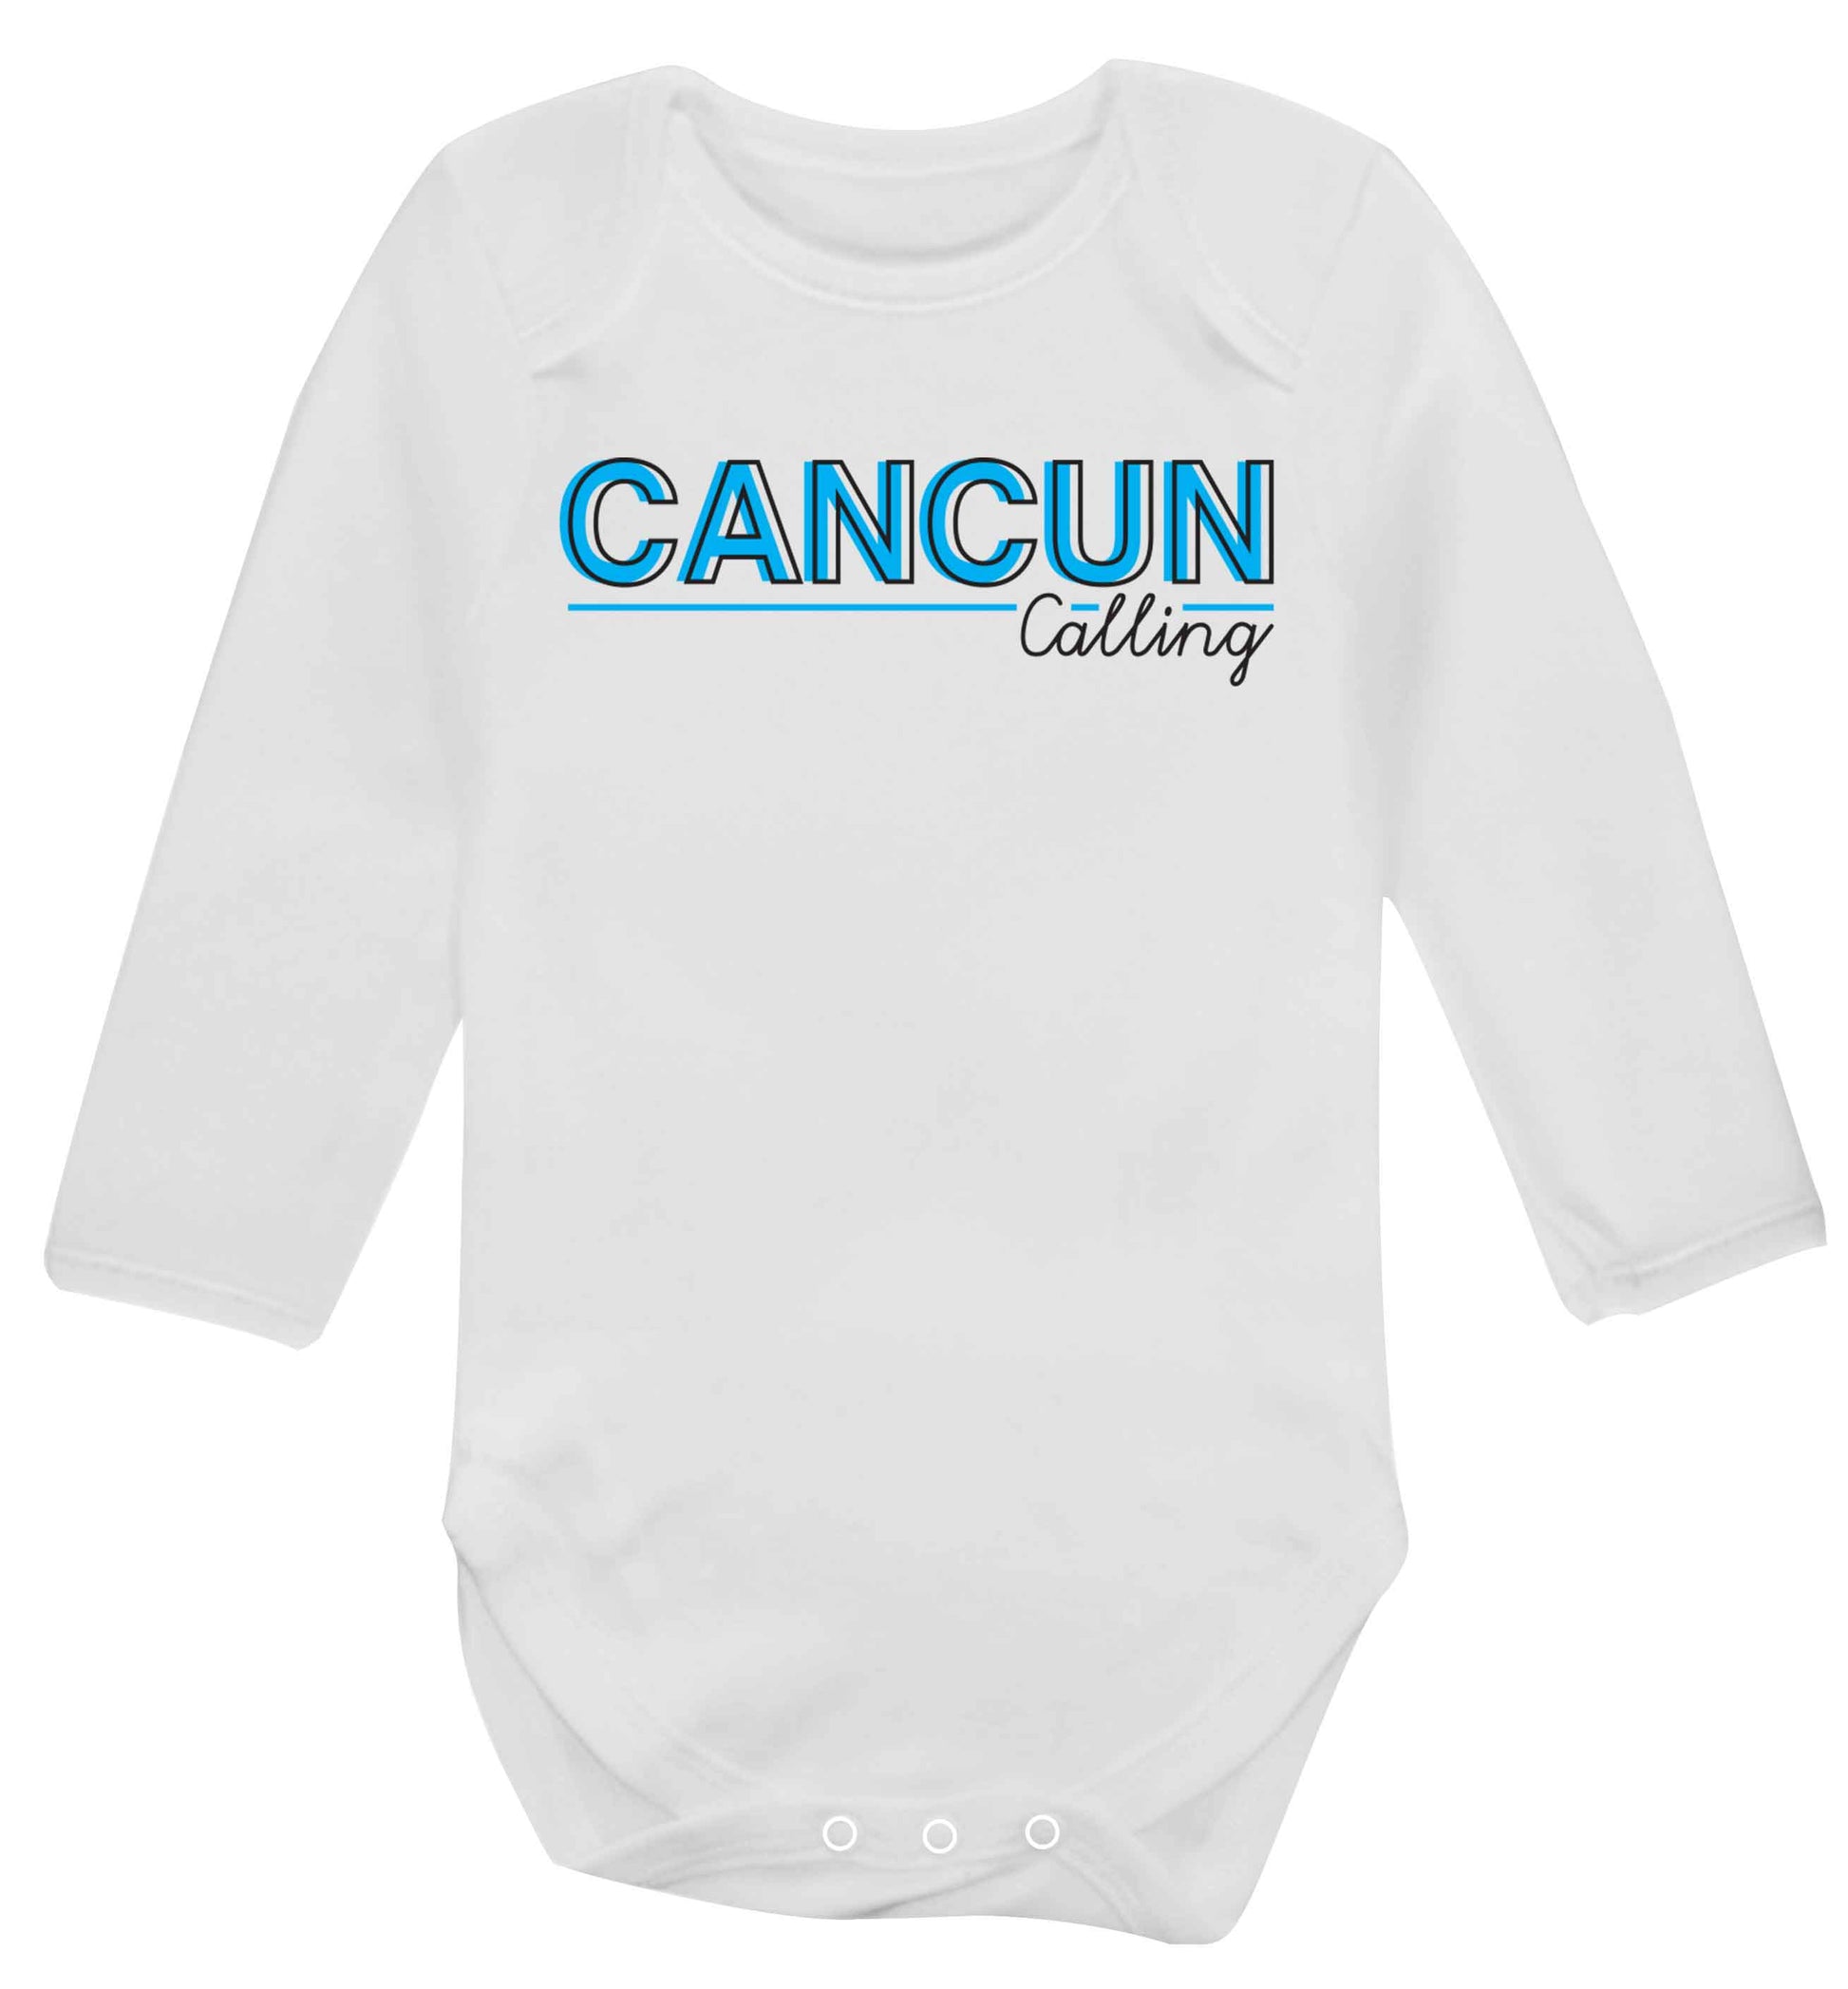 Cancun calling Baby Vest long sleeved white 6-12 months